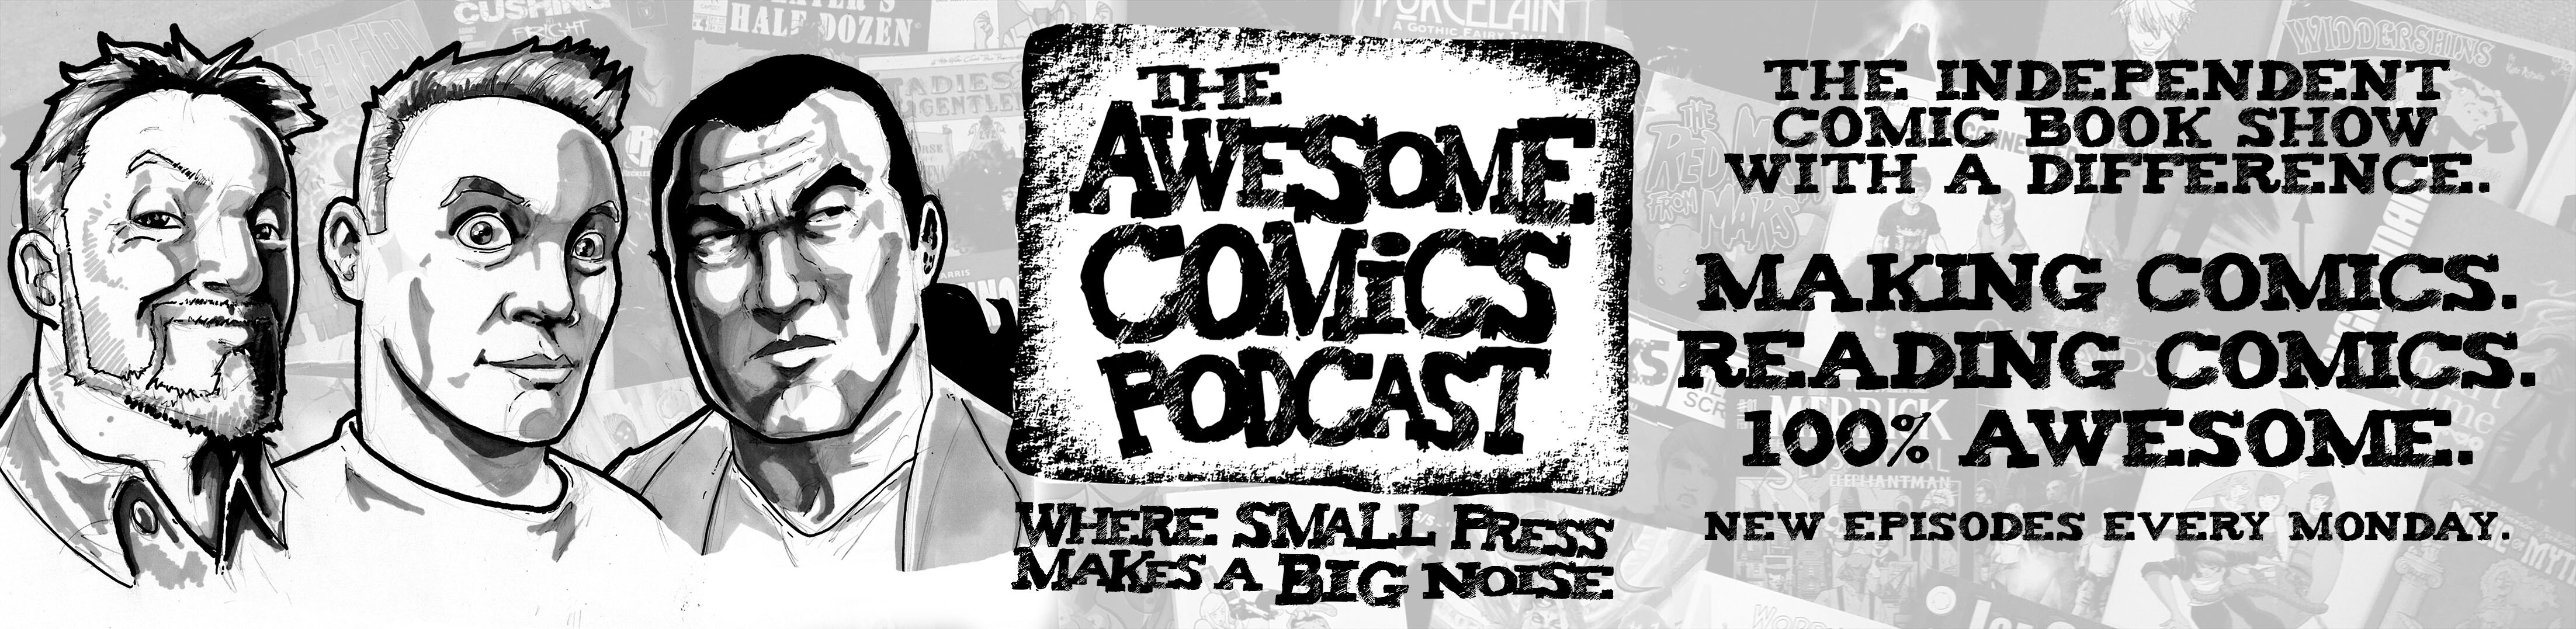 THE AWESOME COMICS PODCAST header image 1